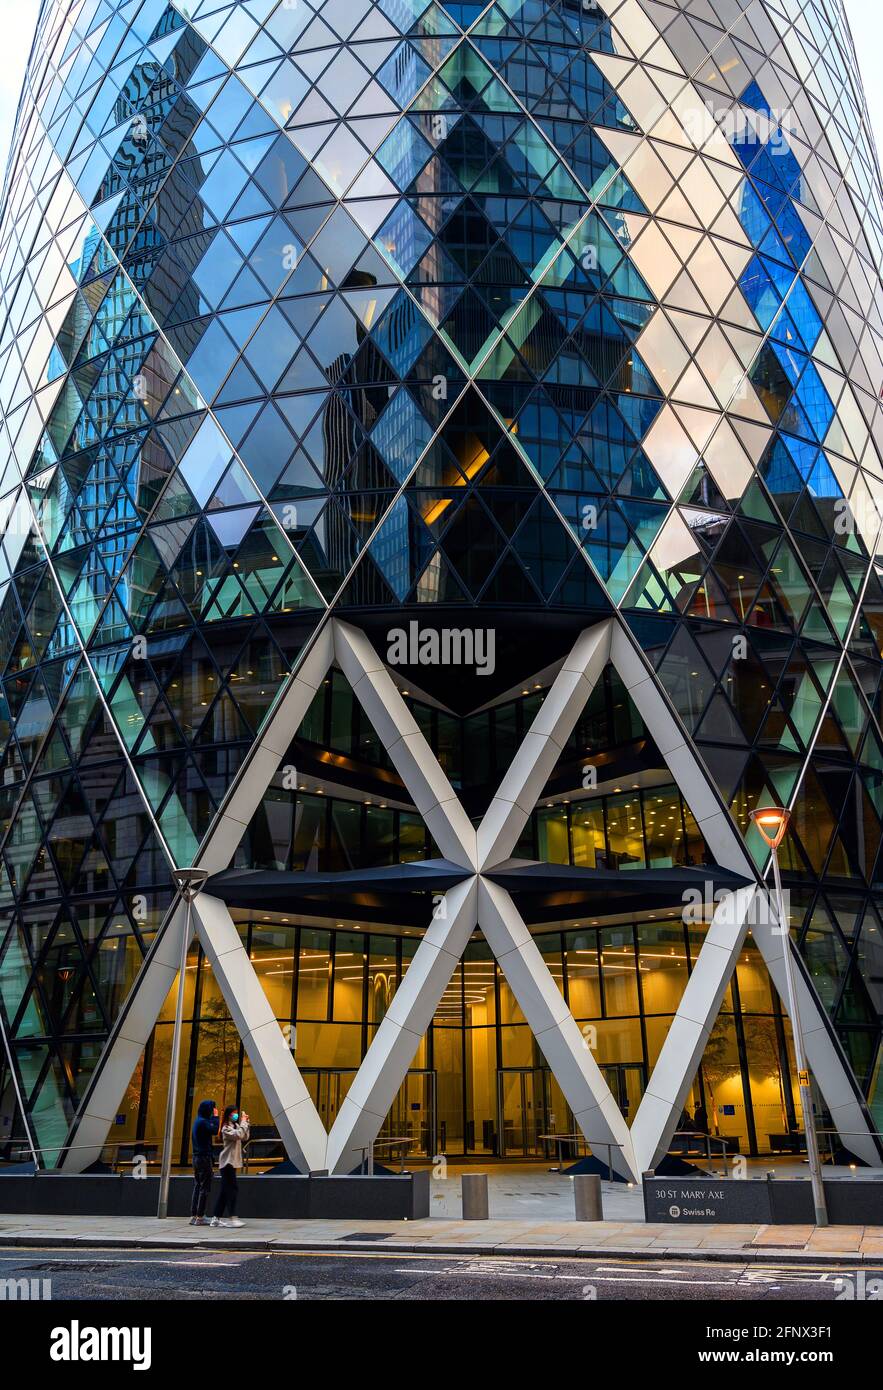 London, UK: Gherkin building in the City of London. View of the entrance of the Gherkin or 30 St Mary Axe with tourists talking photographs. Stock Photo